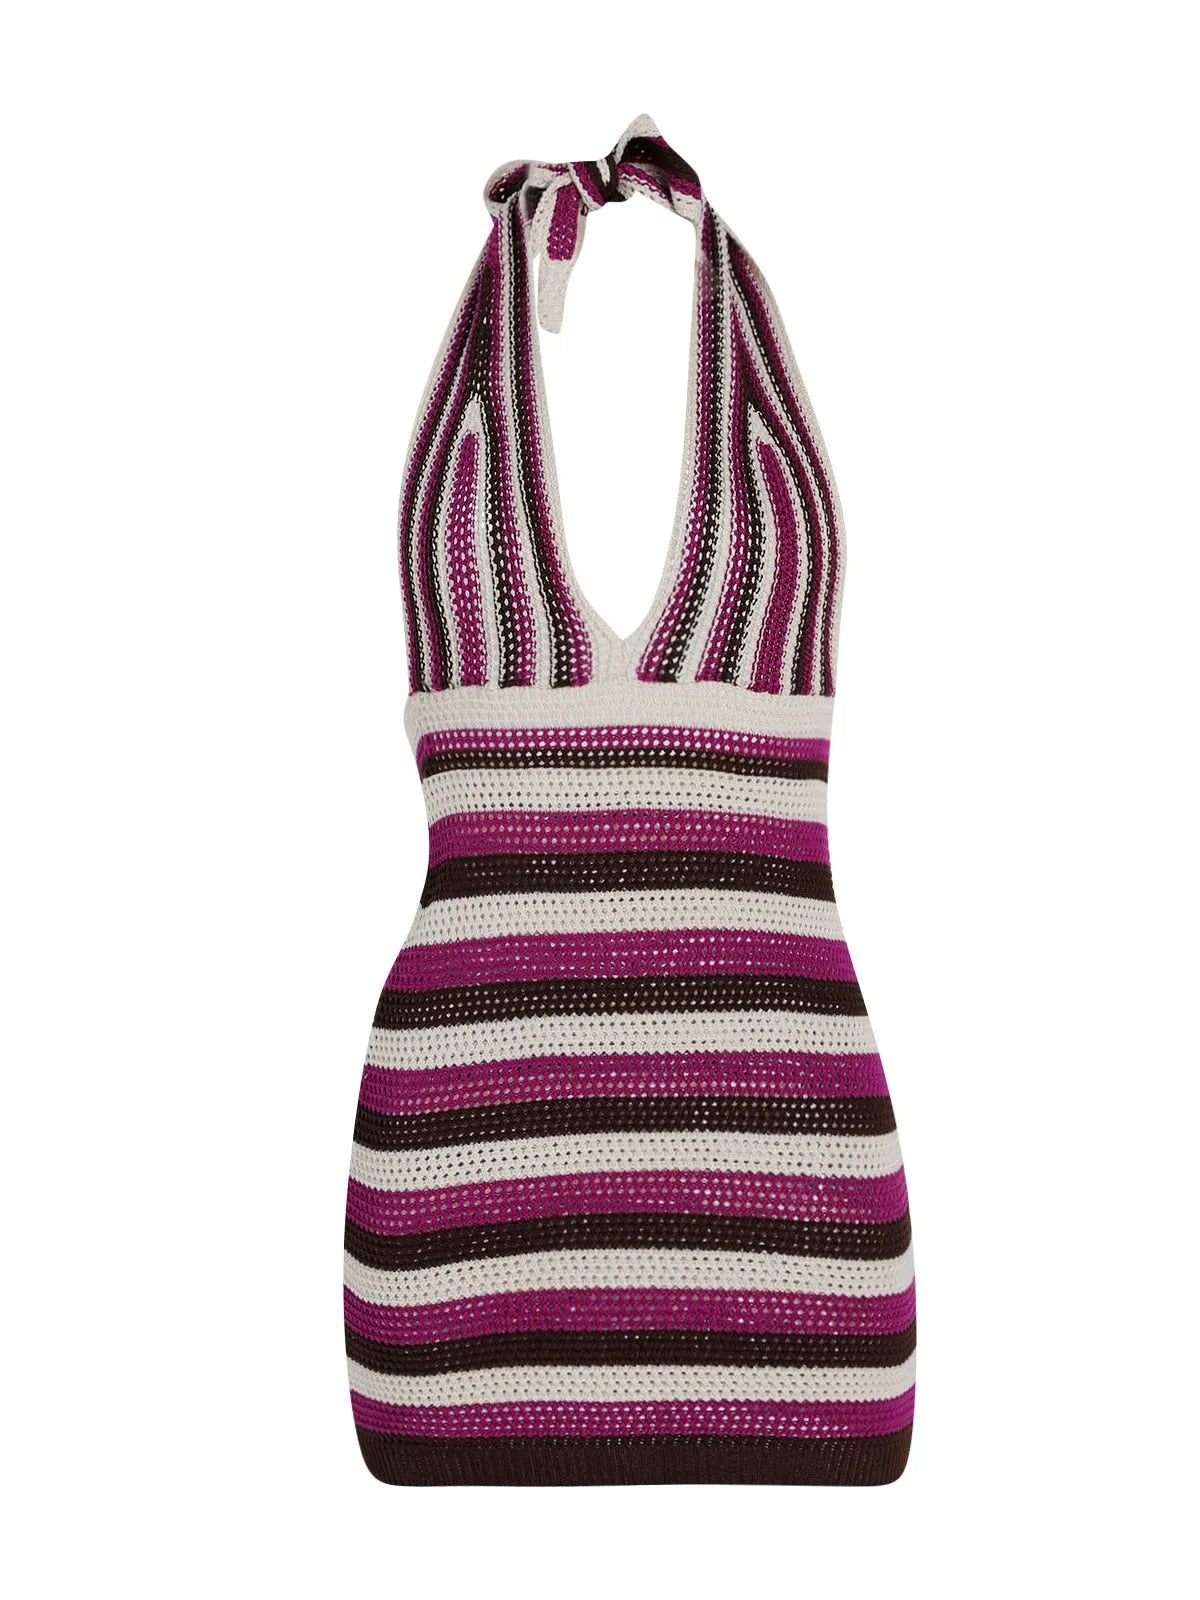 Fashionable and Feminine: Halter Neck Knitted Dress